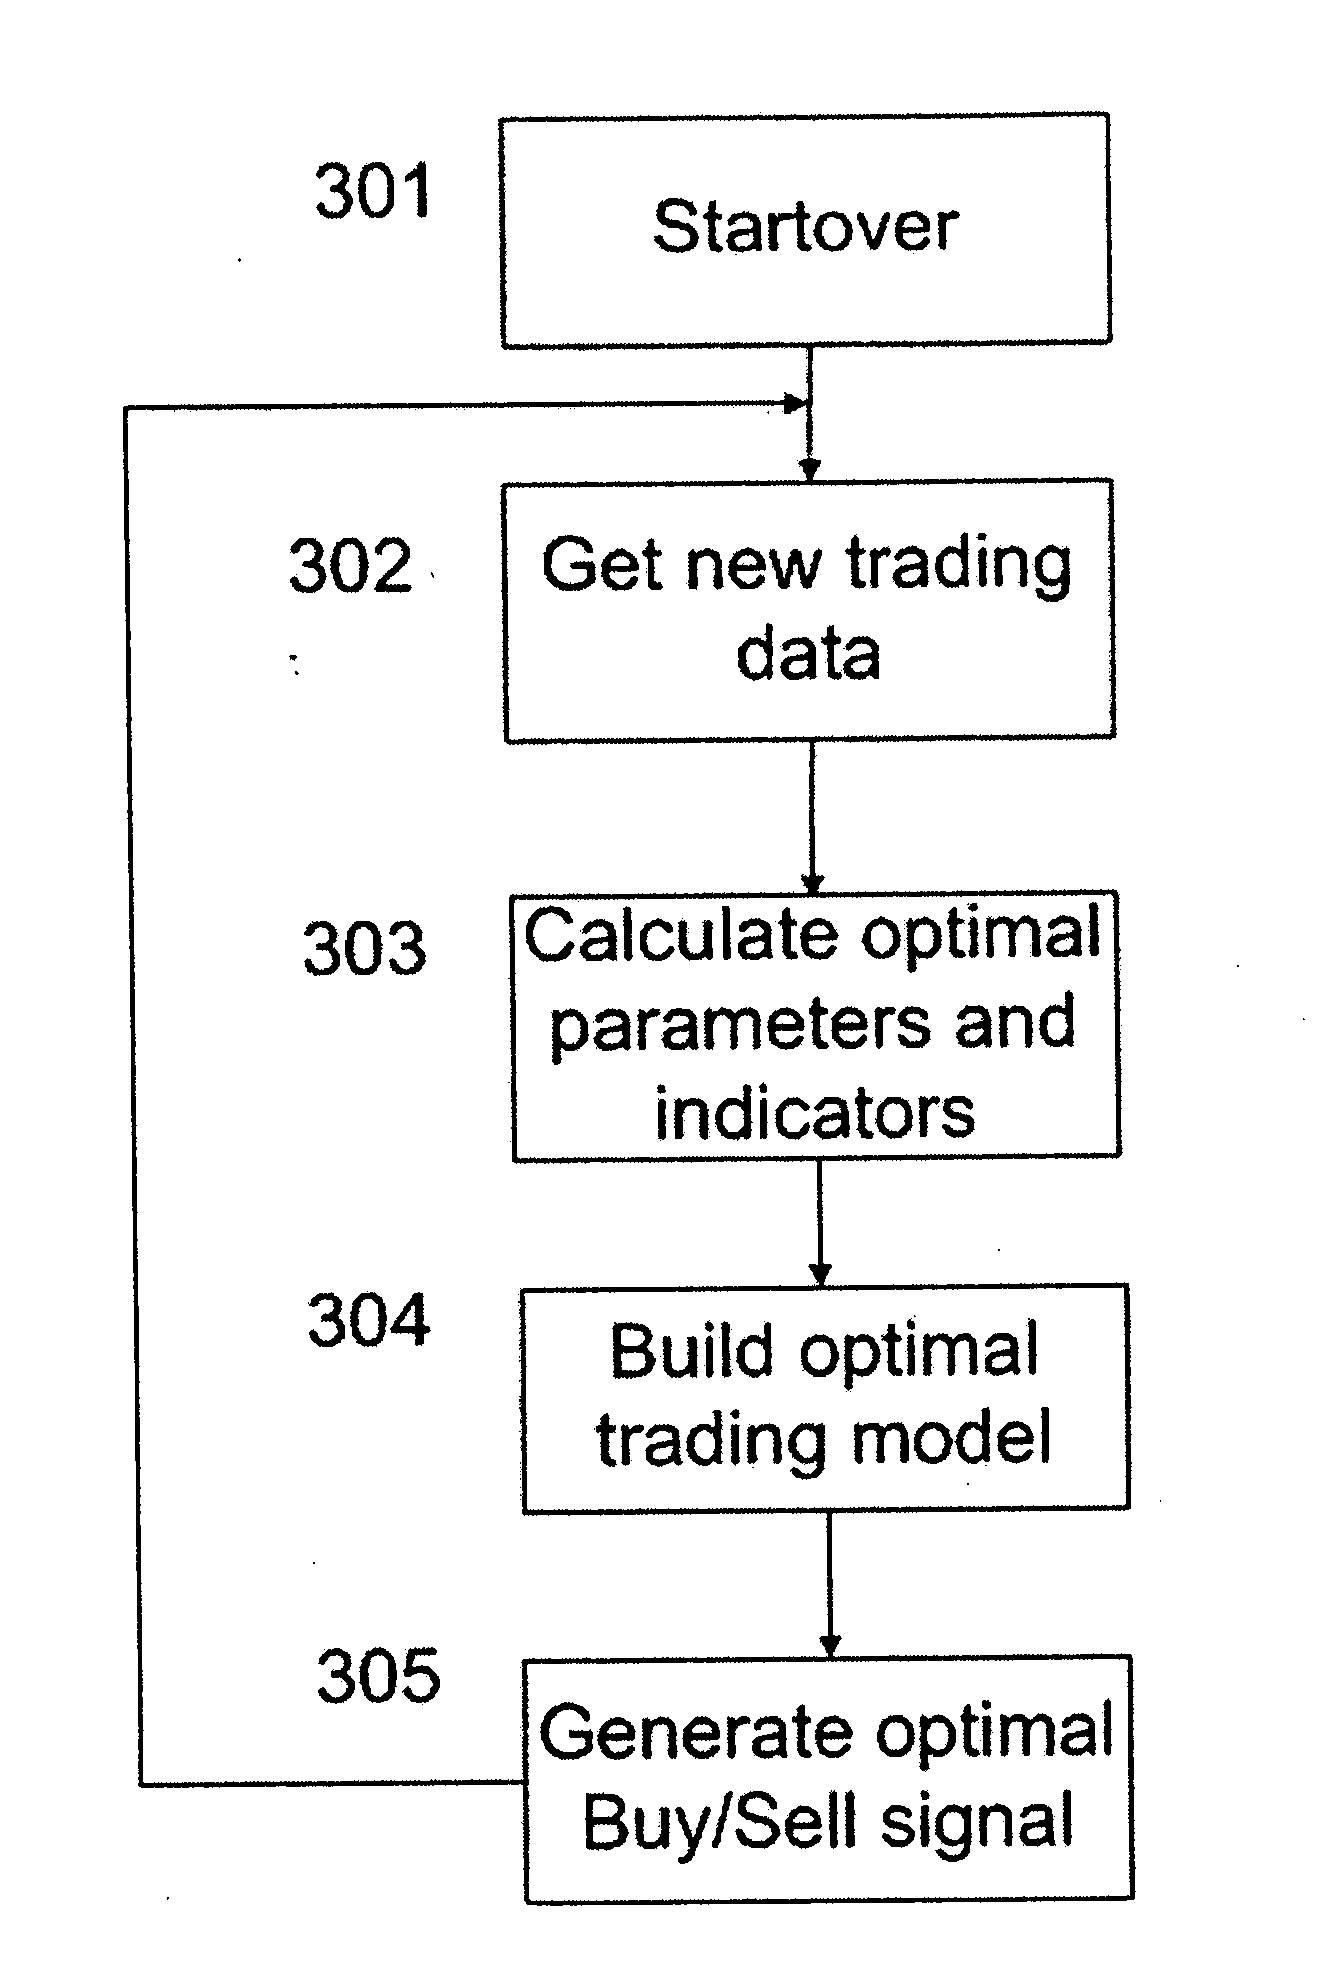 Machine learning automatic order transmission system for sending self-optimized trading signals